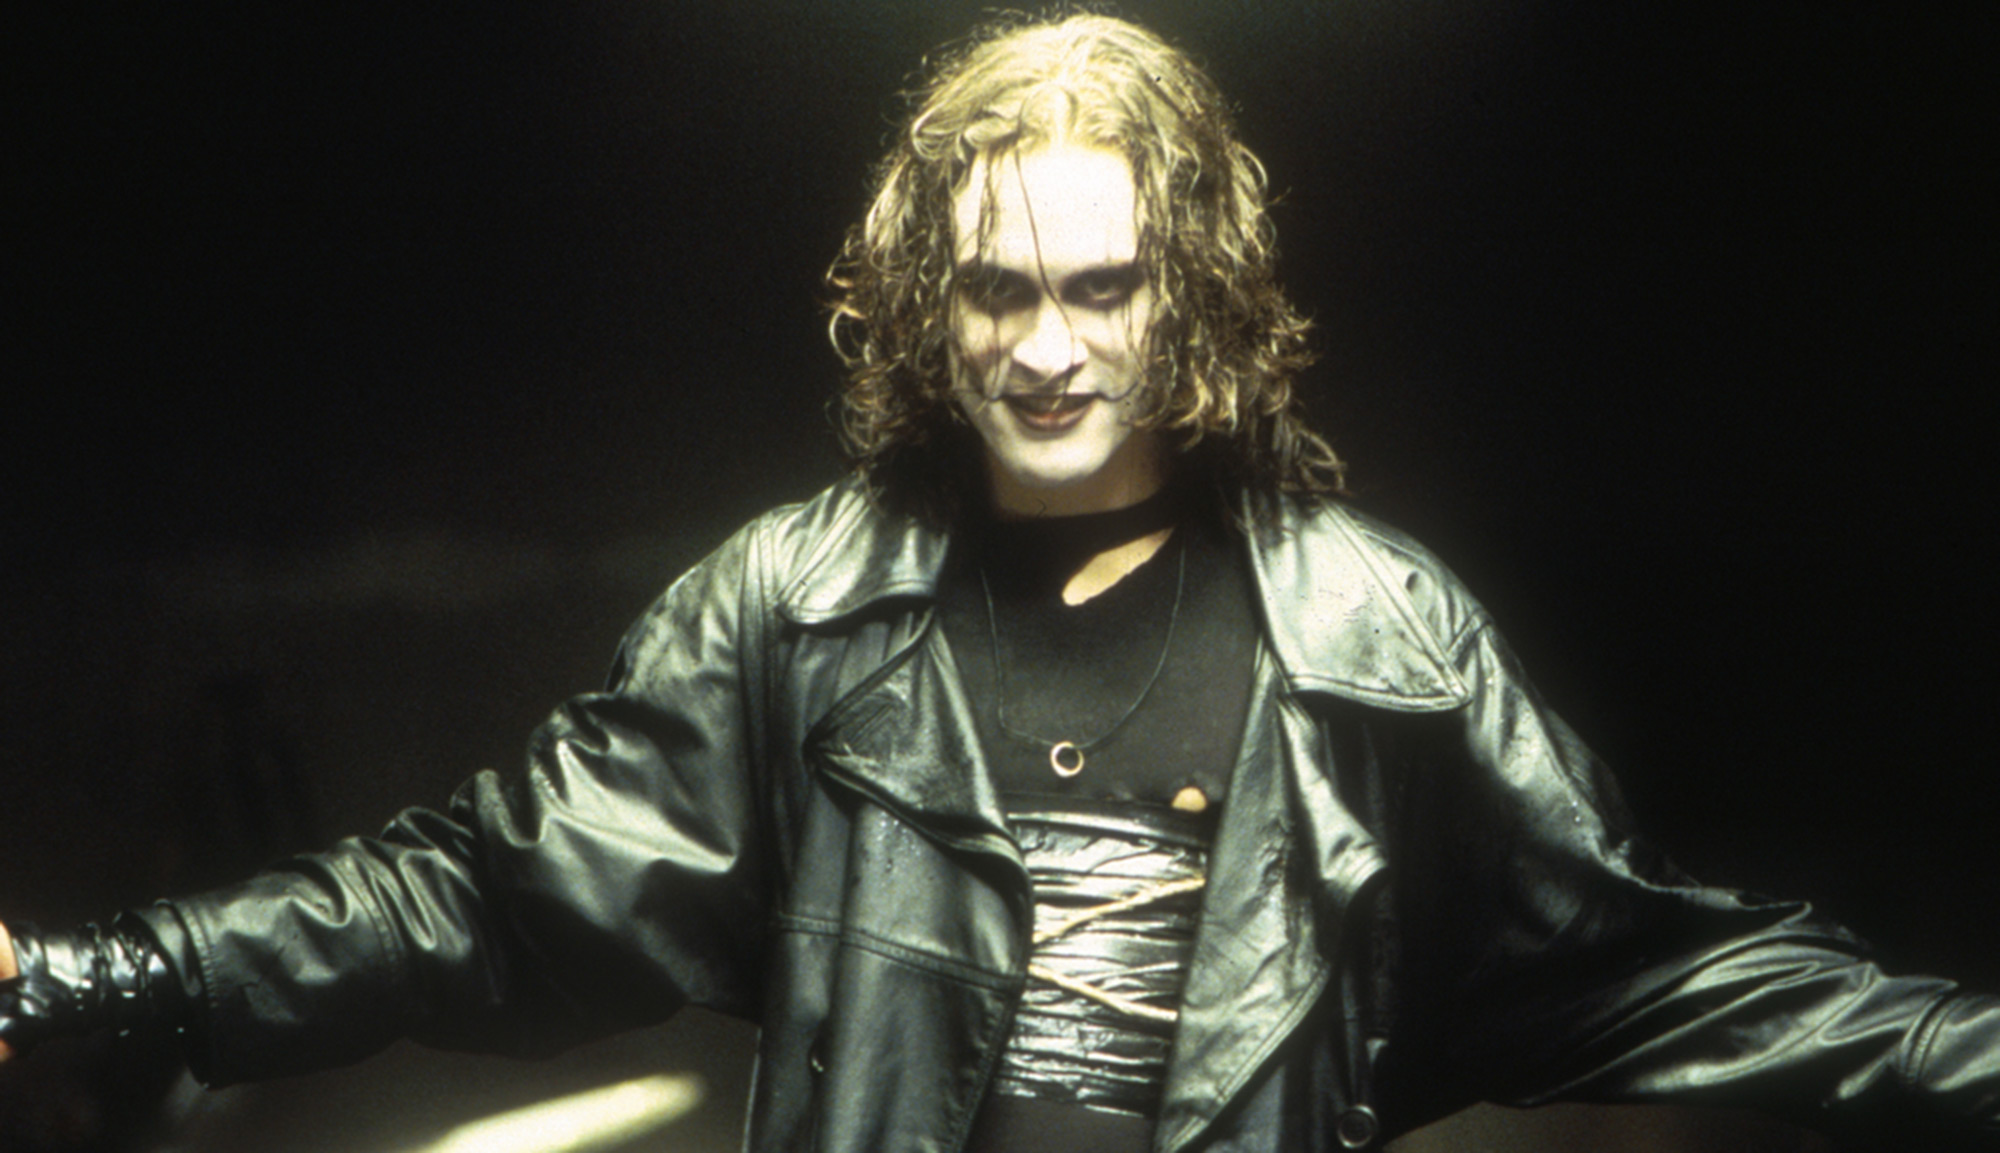 Brandon Lee in "The Crow"